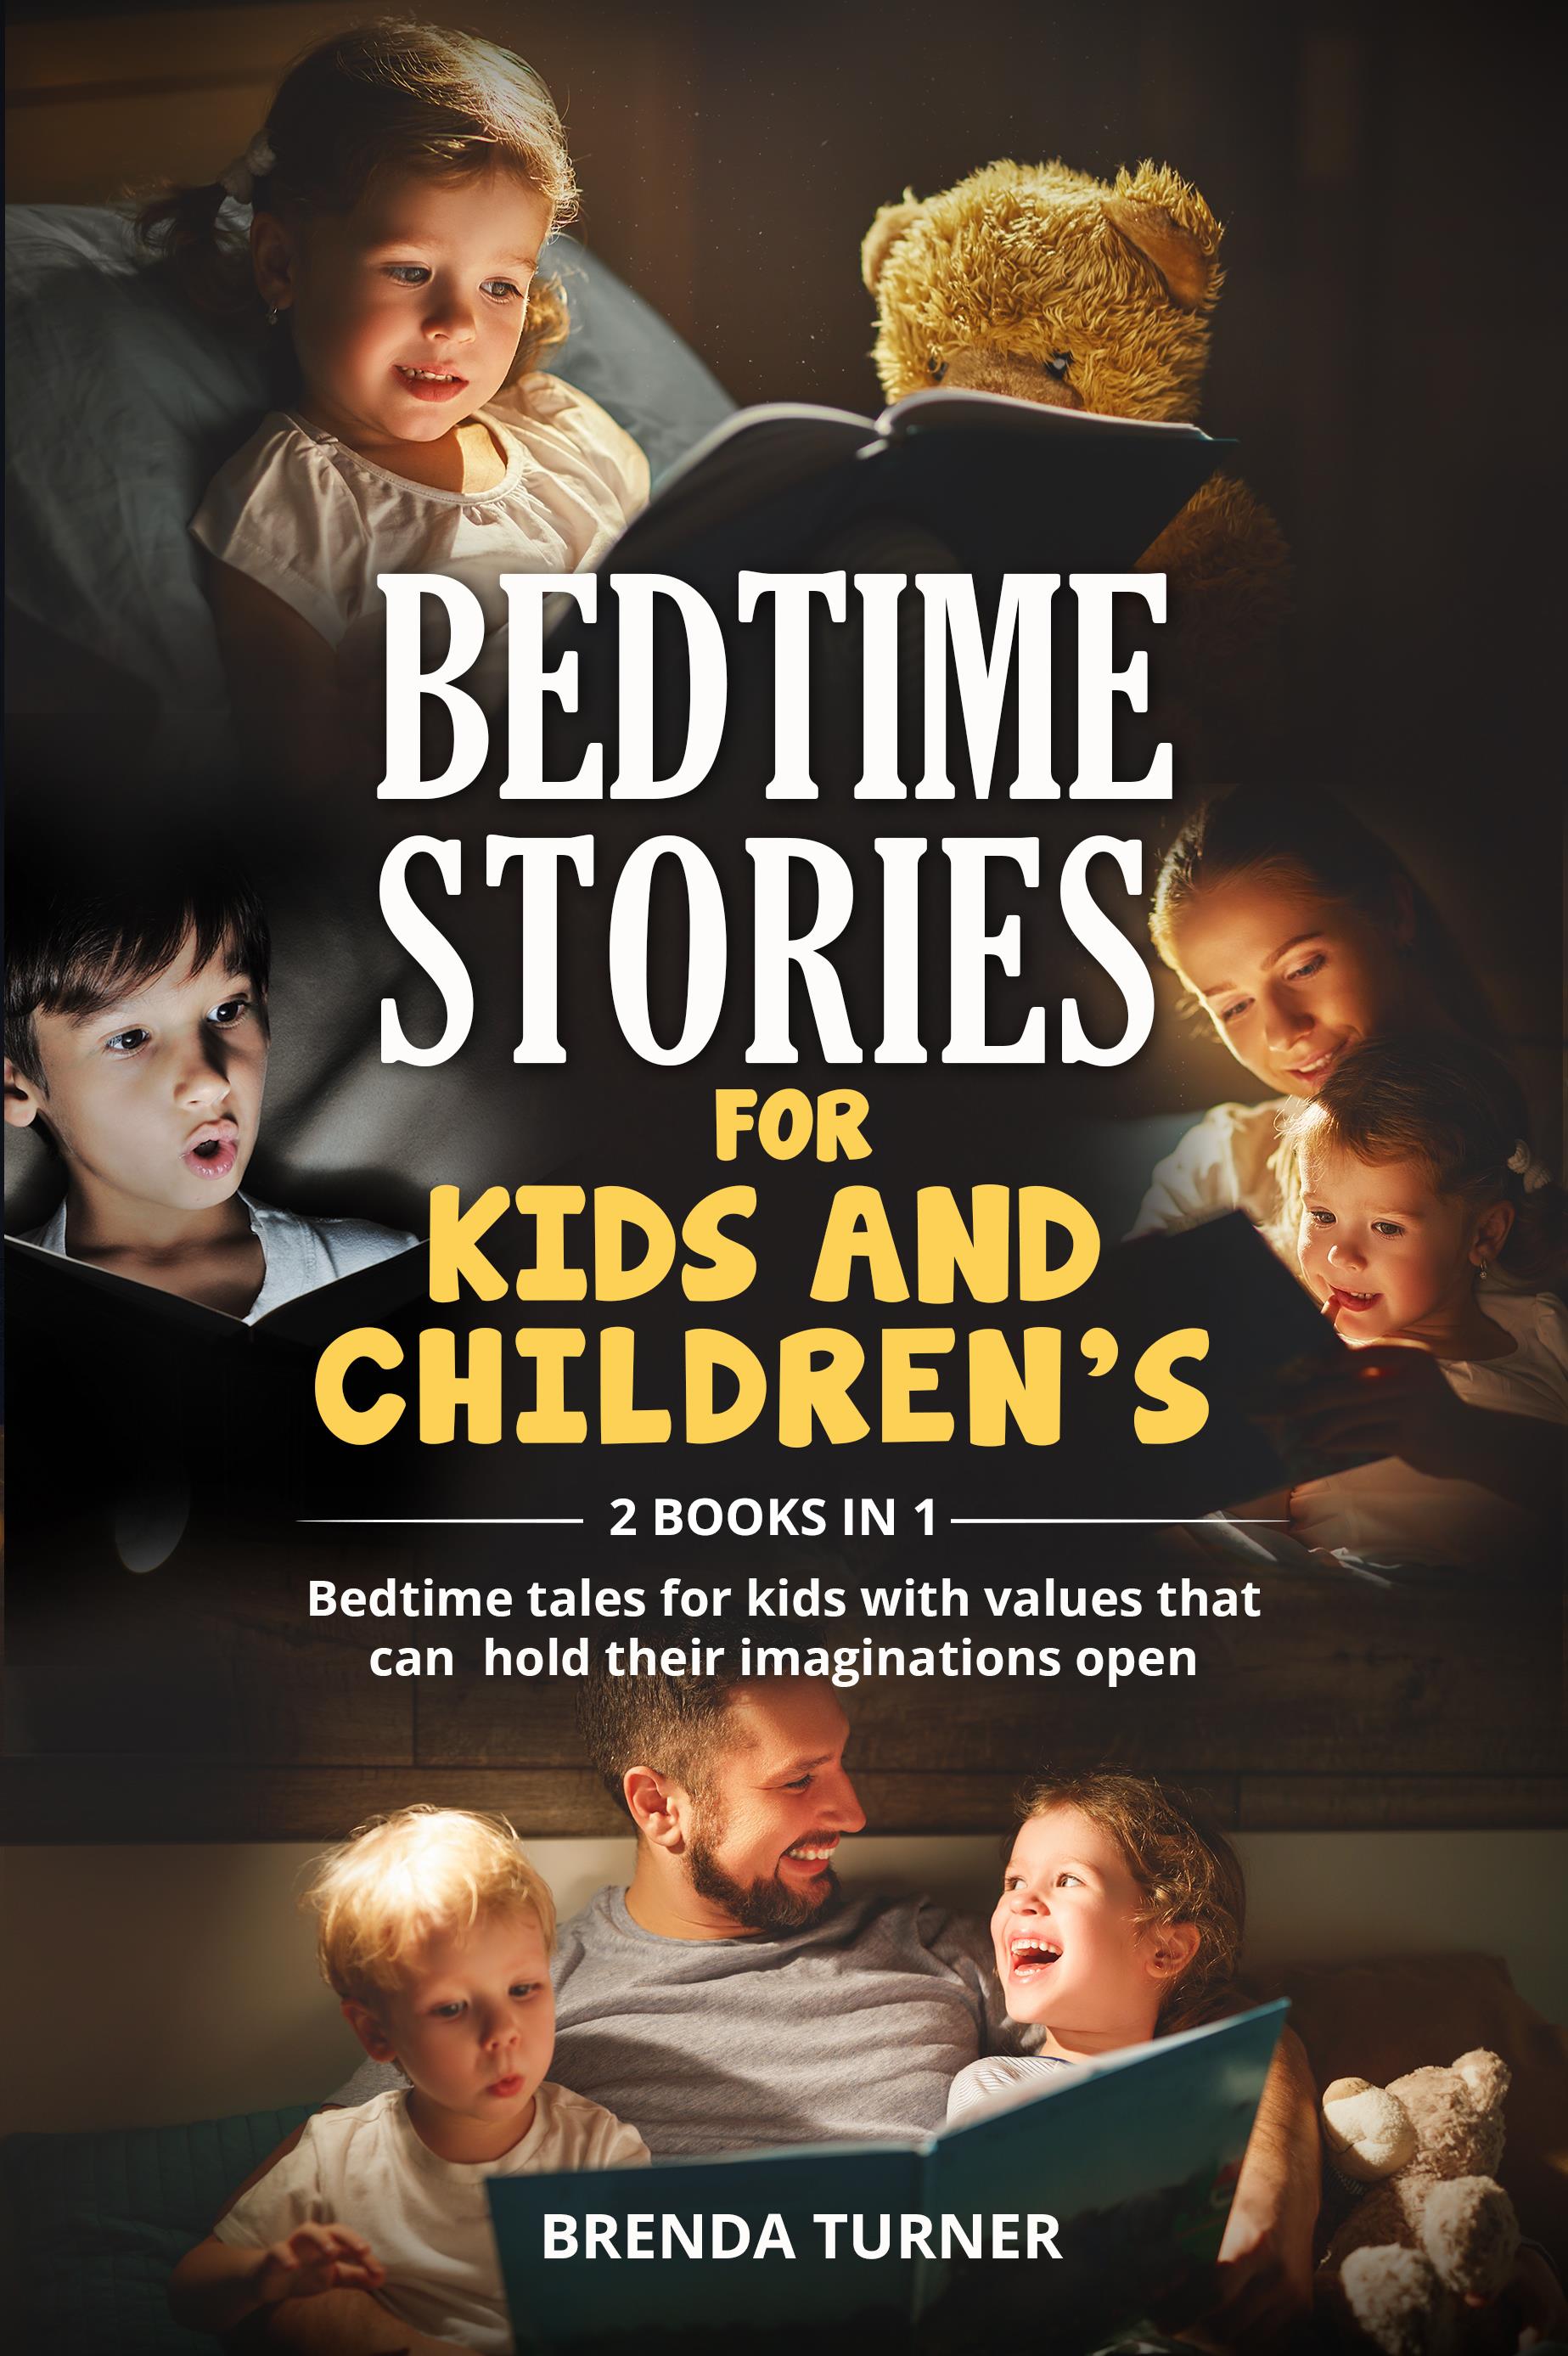 Bedtime stories for kids and children’s (2 Books in 1). Bedtime tales for kids with values that can hold their imaginations open.